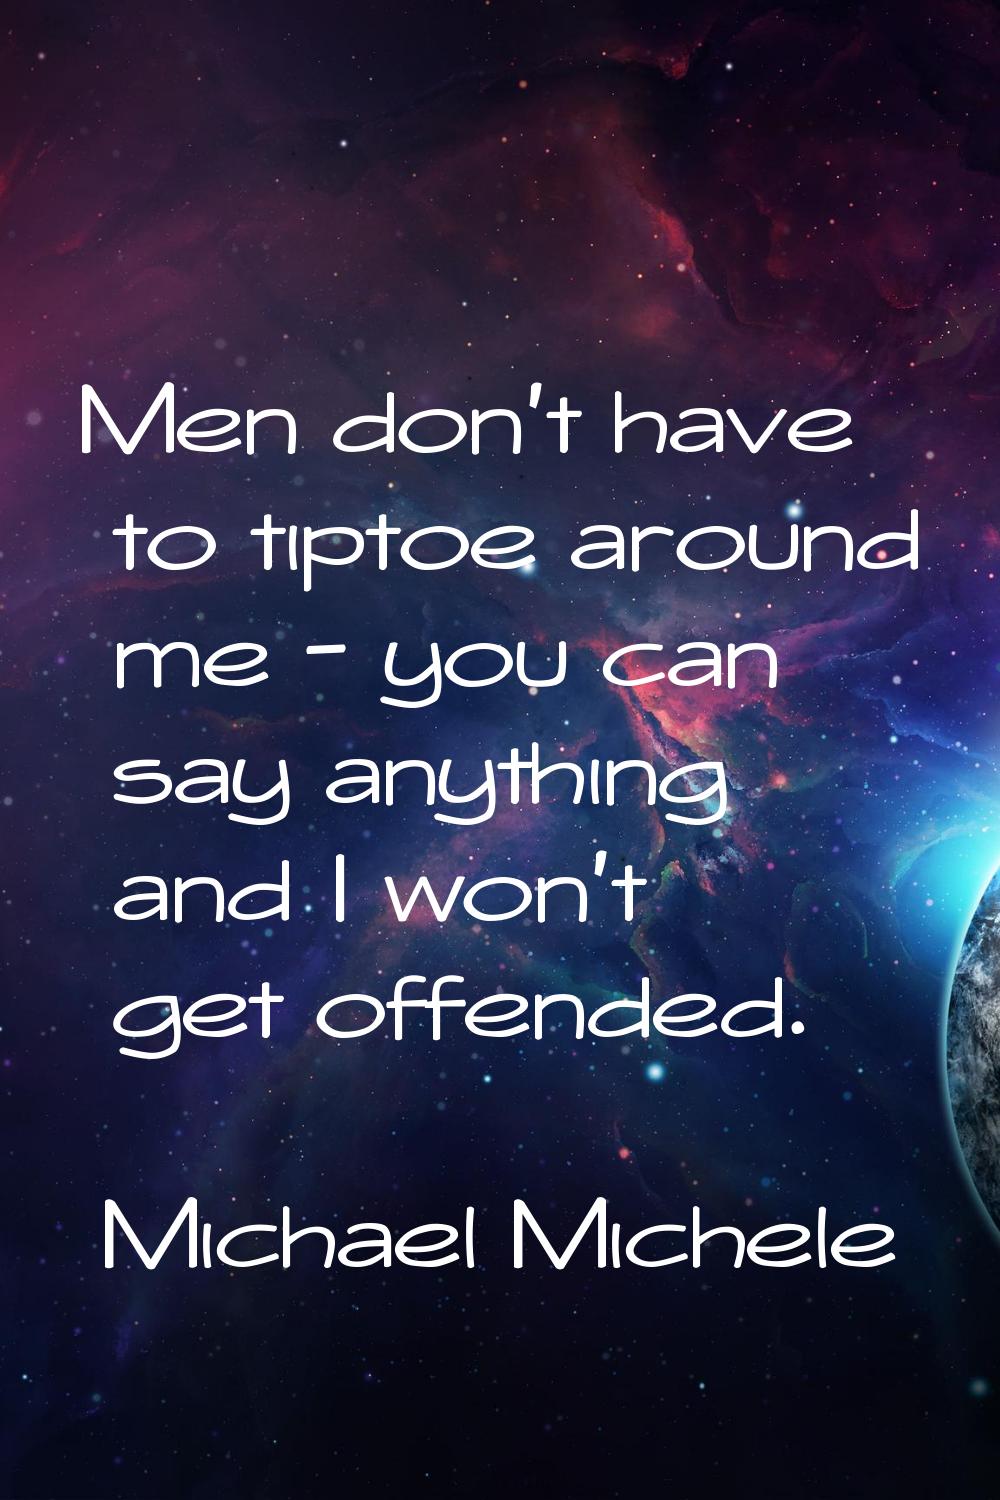 Men don't have to tiptoe around me - you can say anything and I won't get offended.